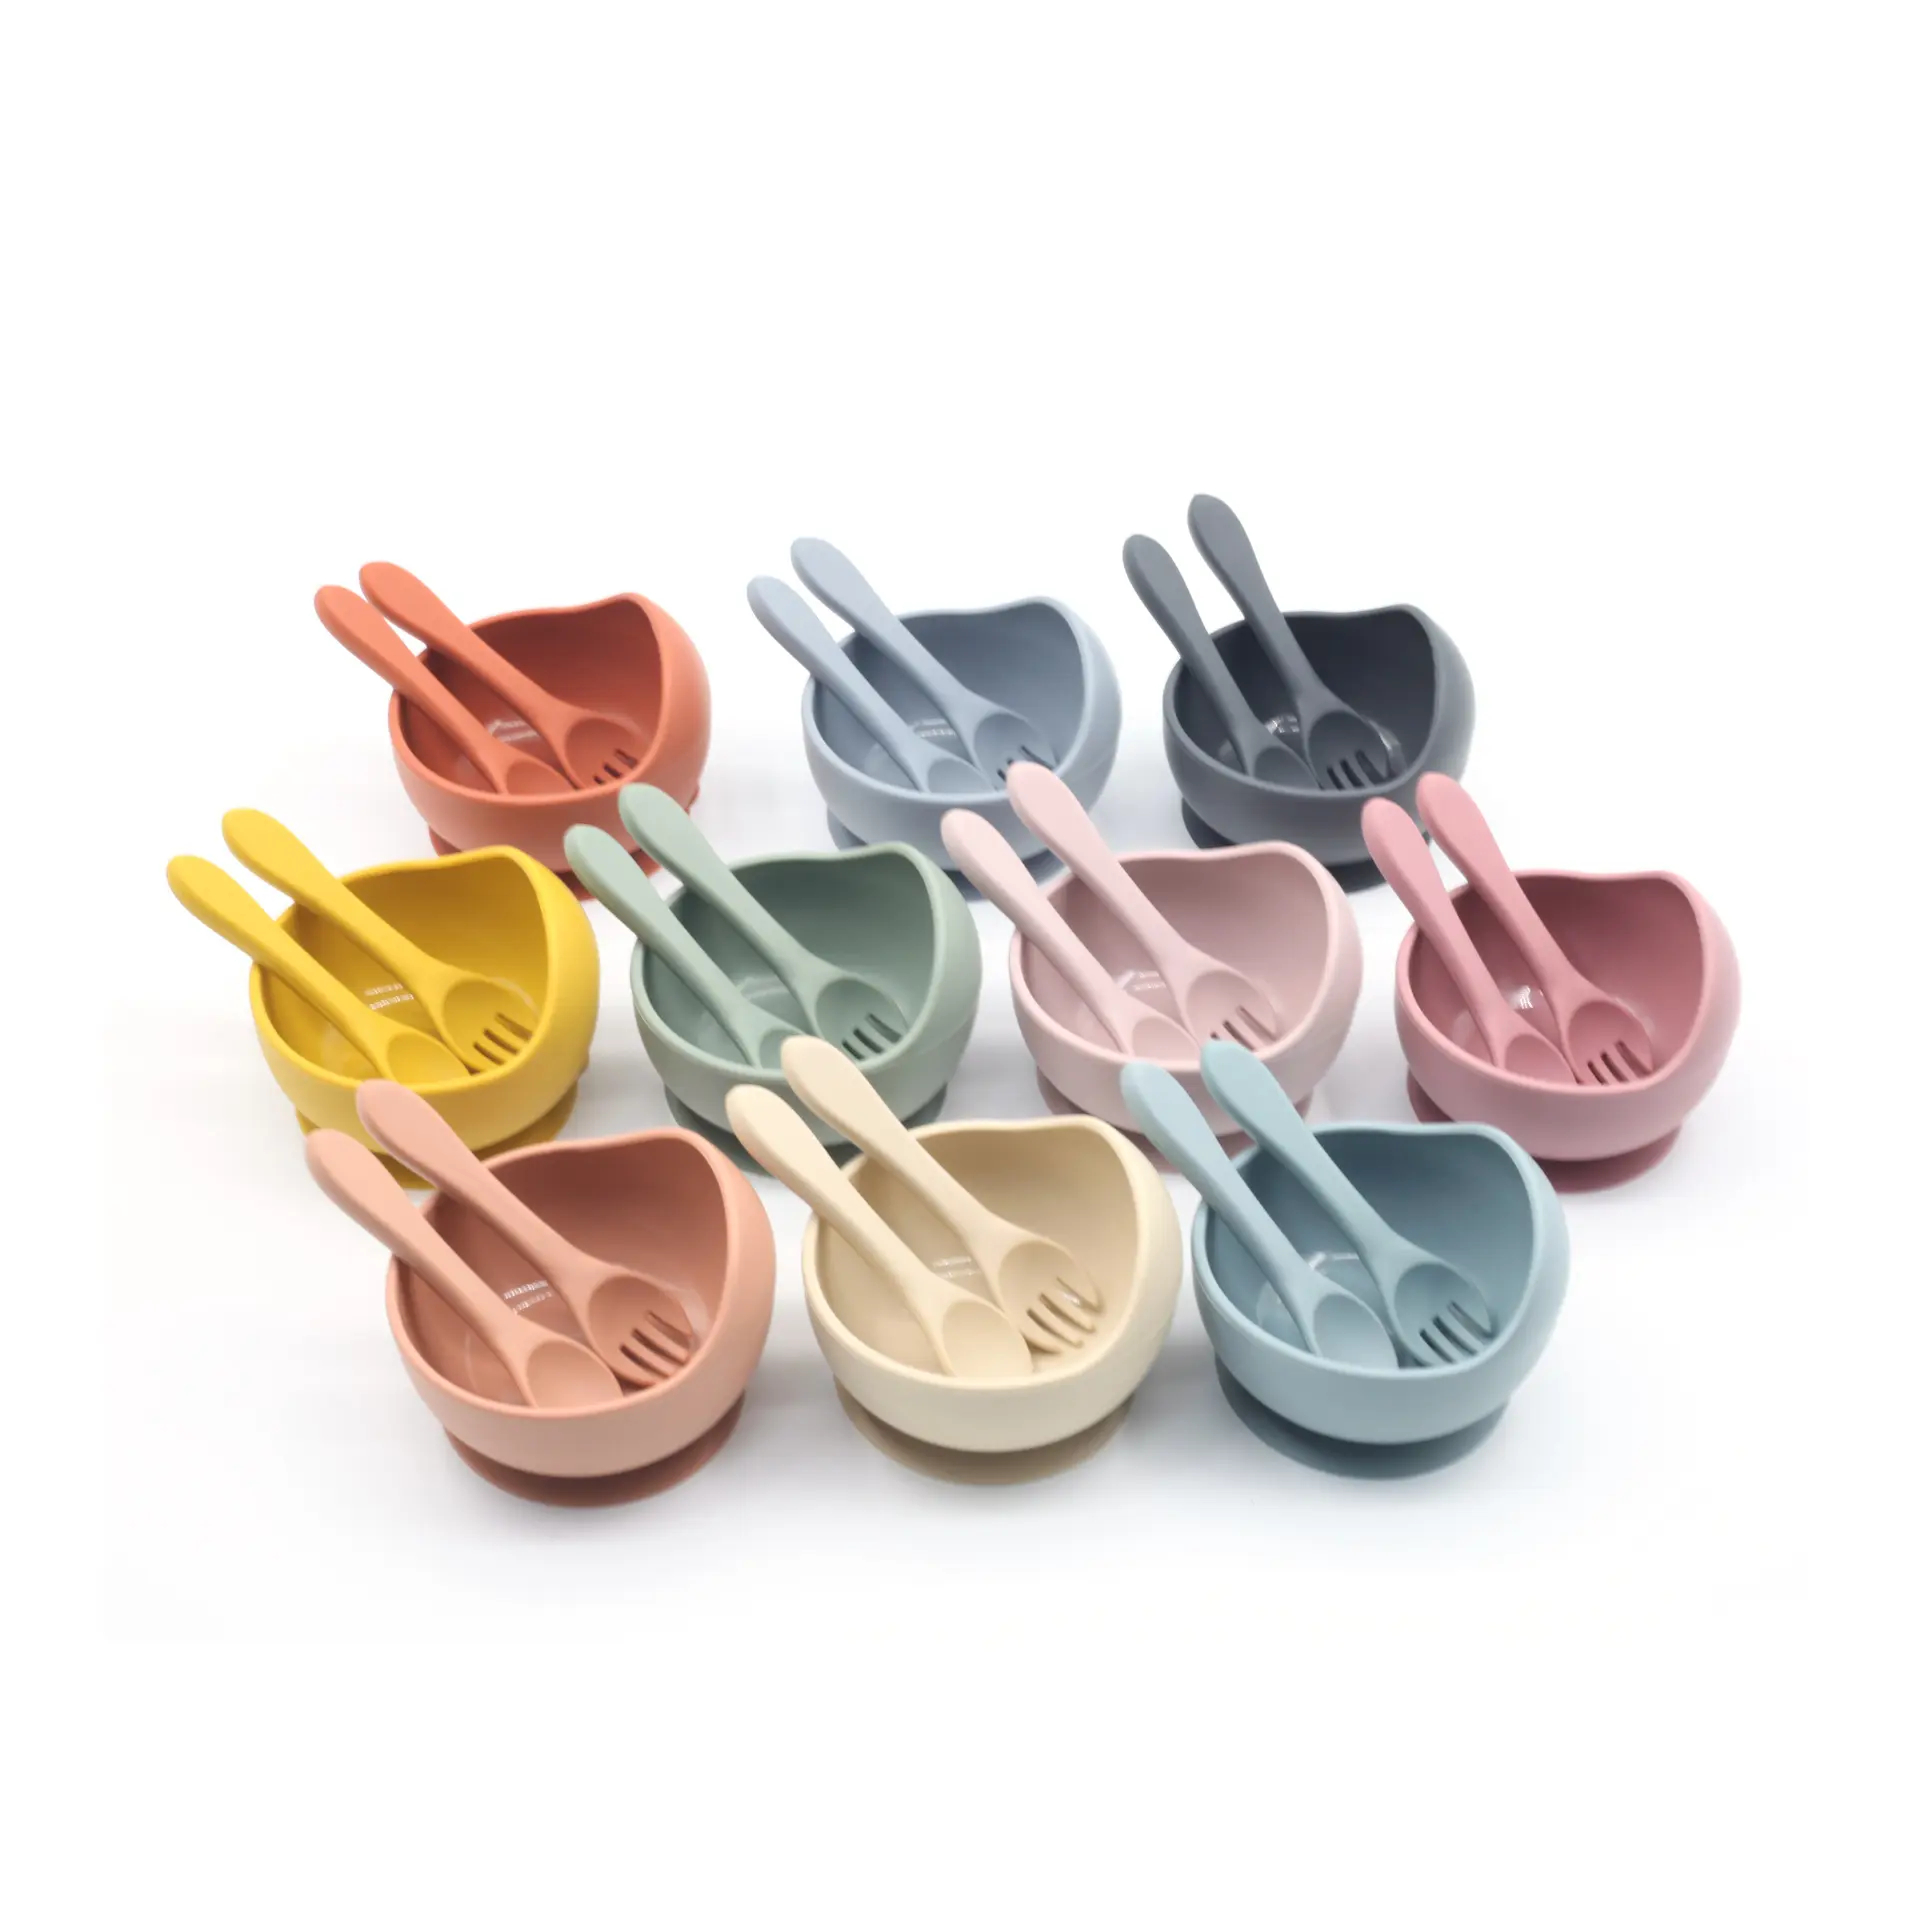 Eco-friendly Oganic Silicone Bowls Wooden Baby Feeding Suction Bowl With Spoon And Fork